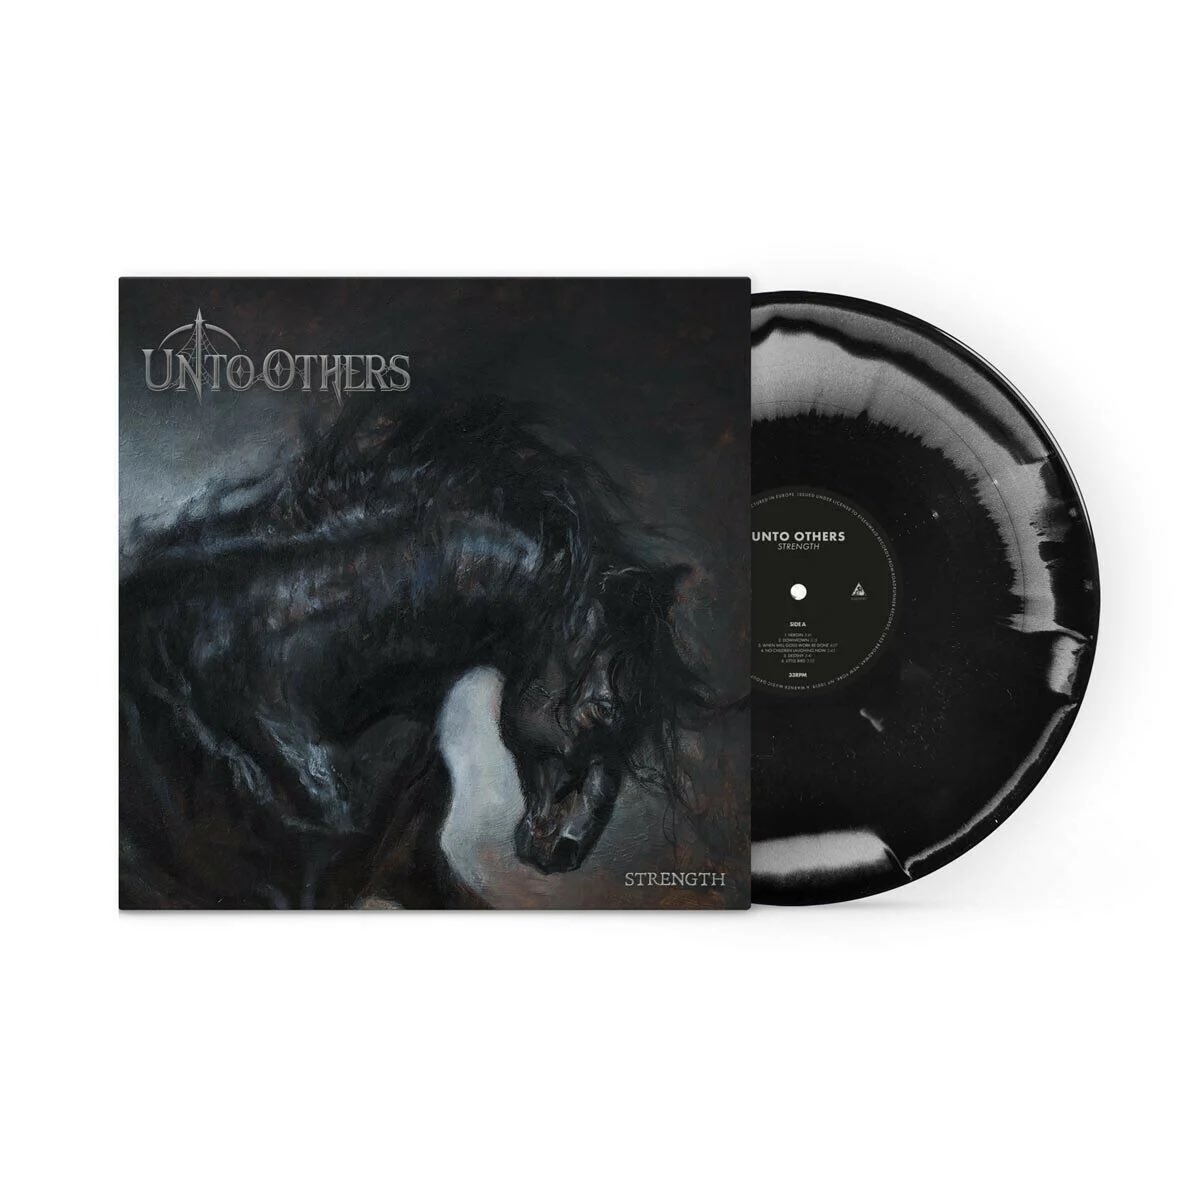 After about a year of no stock, we have 50 copies of “Strength” on deluxe vinyl LP in our US Store lonefirrecords.com You can also read a few words on the making of the album at bio.to/uopdx under the “newsletters” section. Thanks for supporting UO